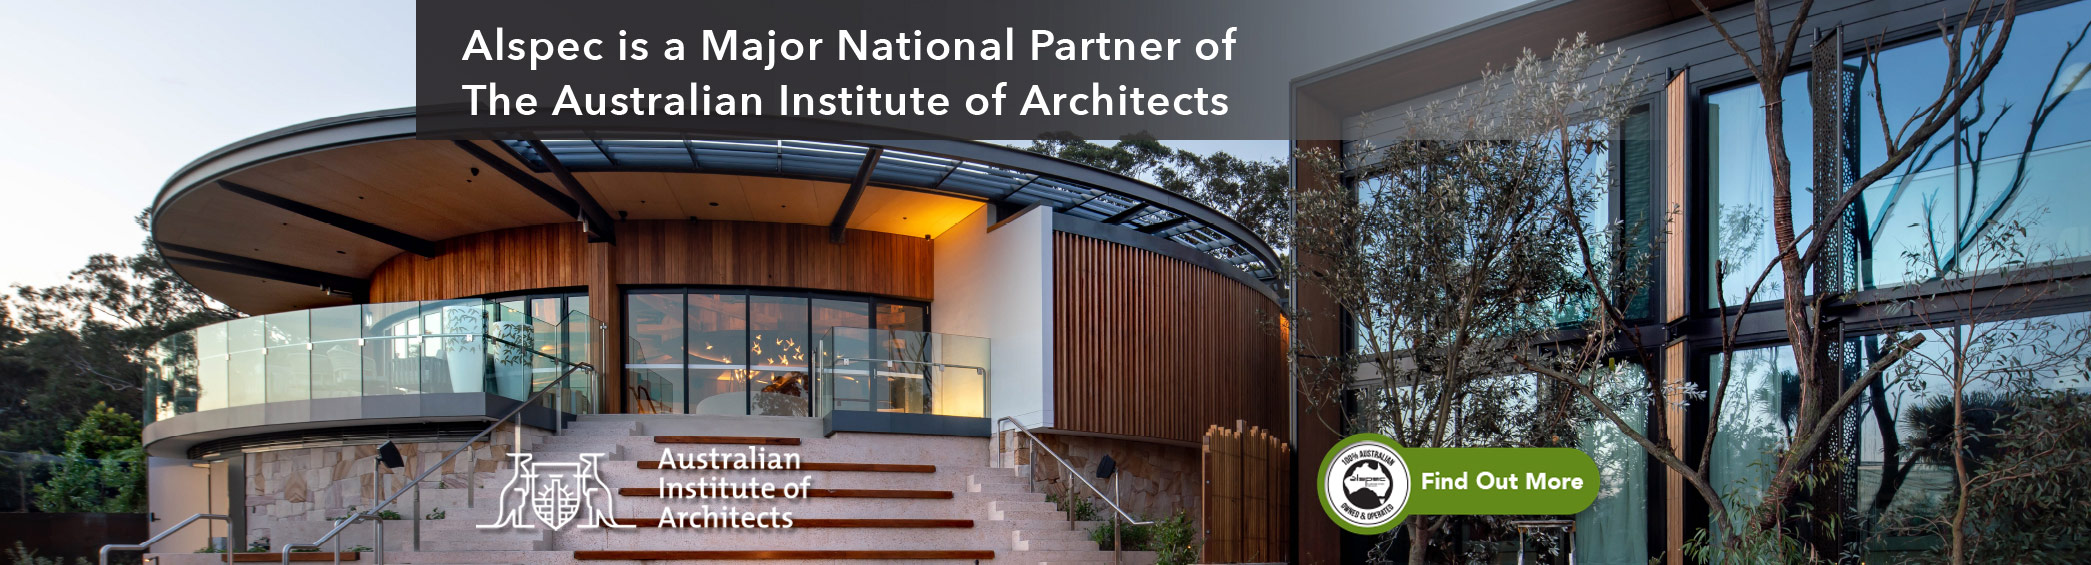 Alspec is a Major National Partner of The Australian Institute of Architects